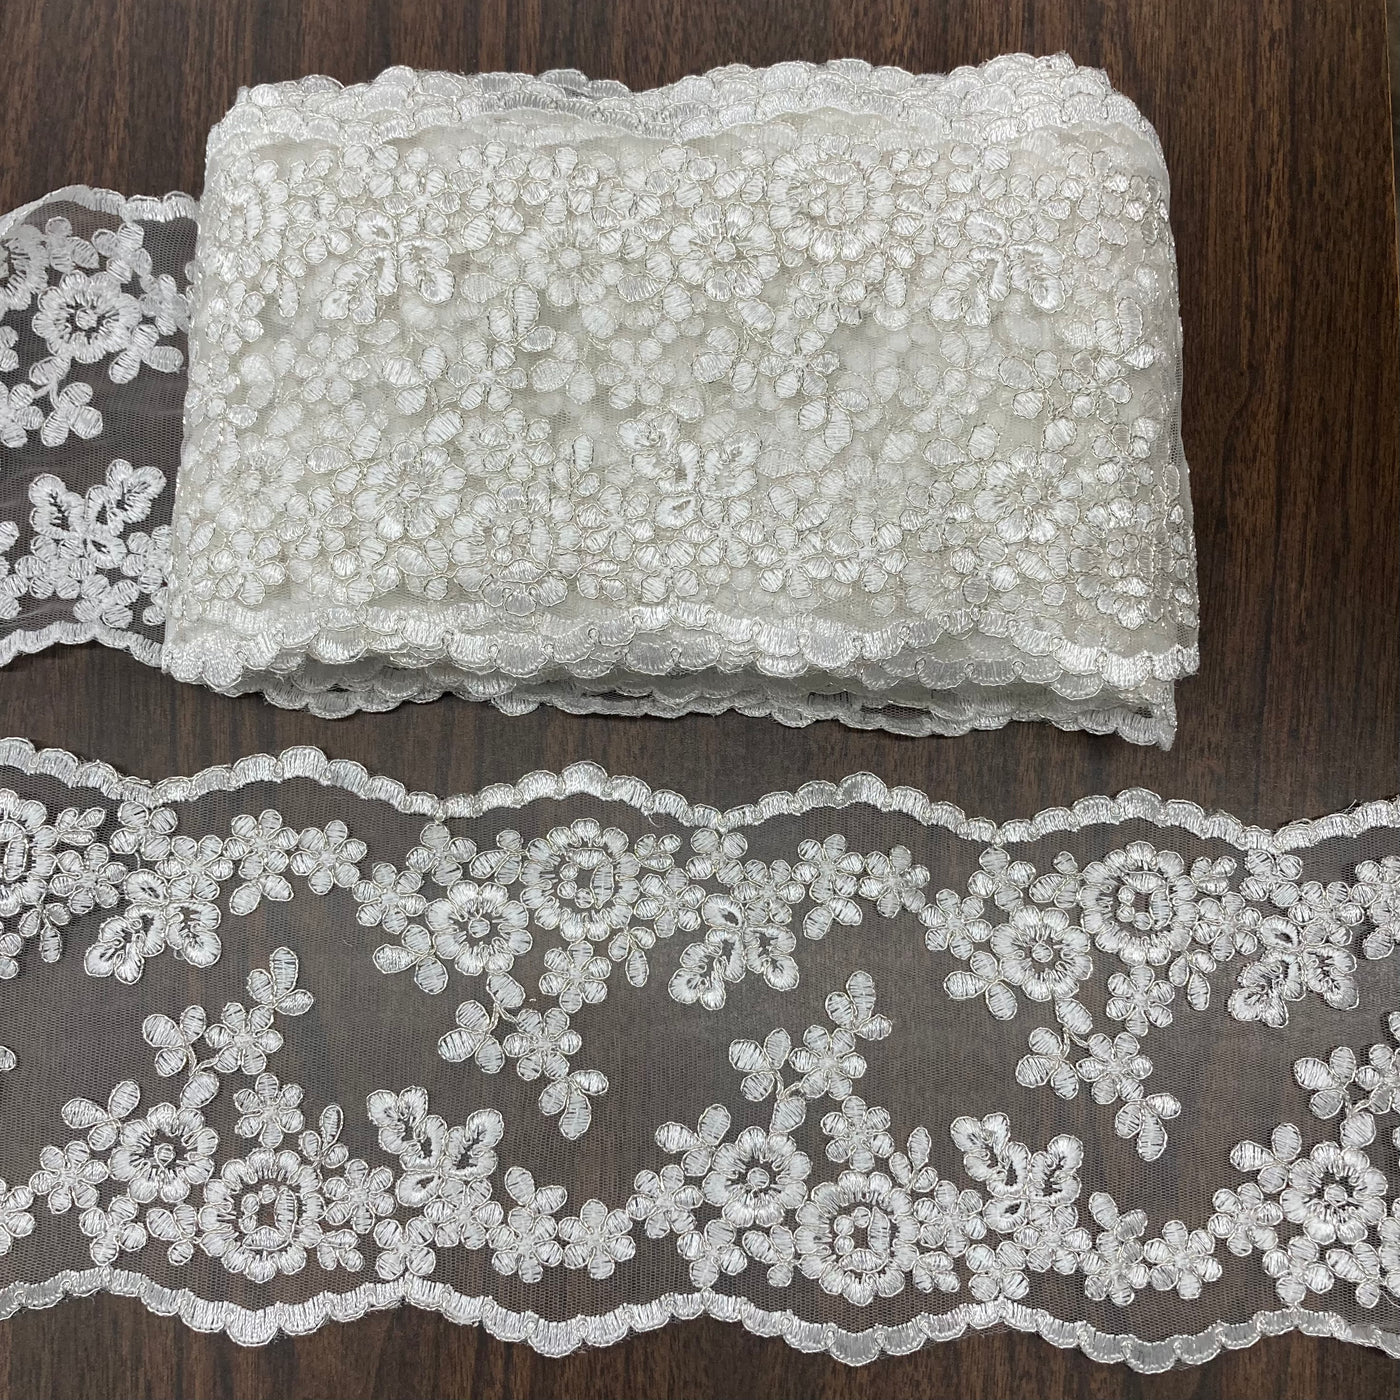 Corded & Embroidered Double Sided Ivory with Silver Trimming on Mesh Net Lace. Lace Usa